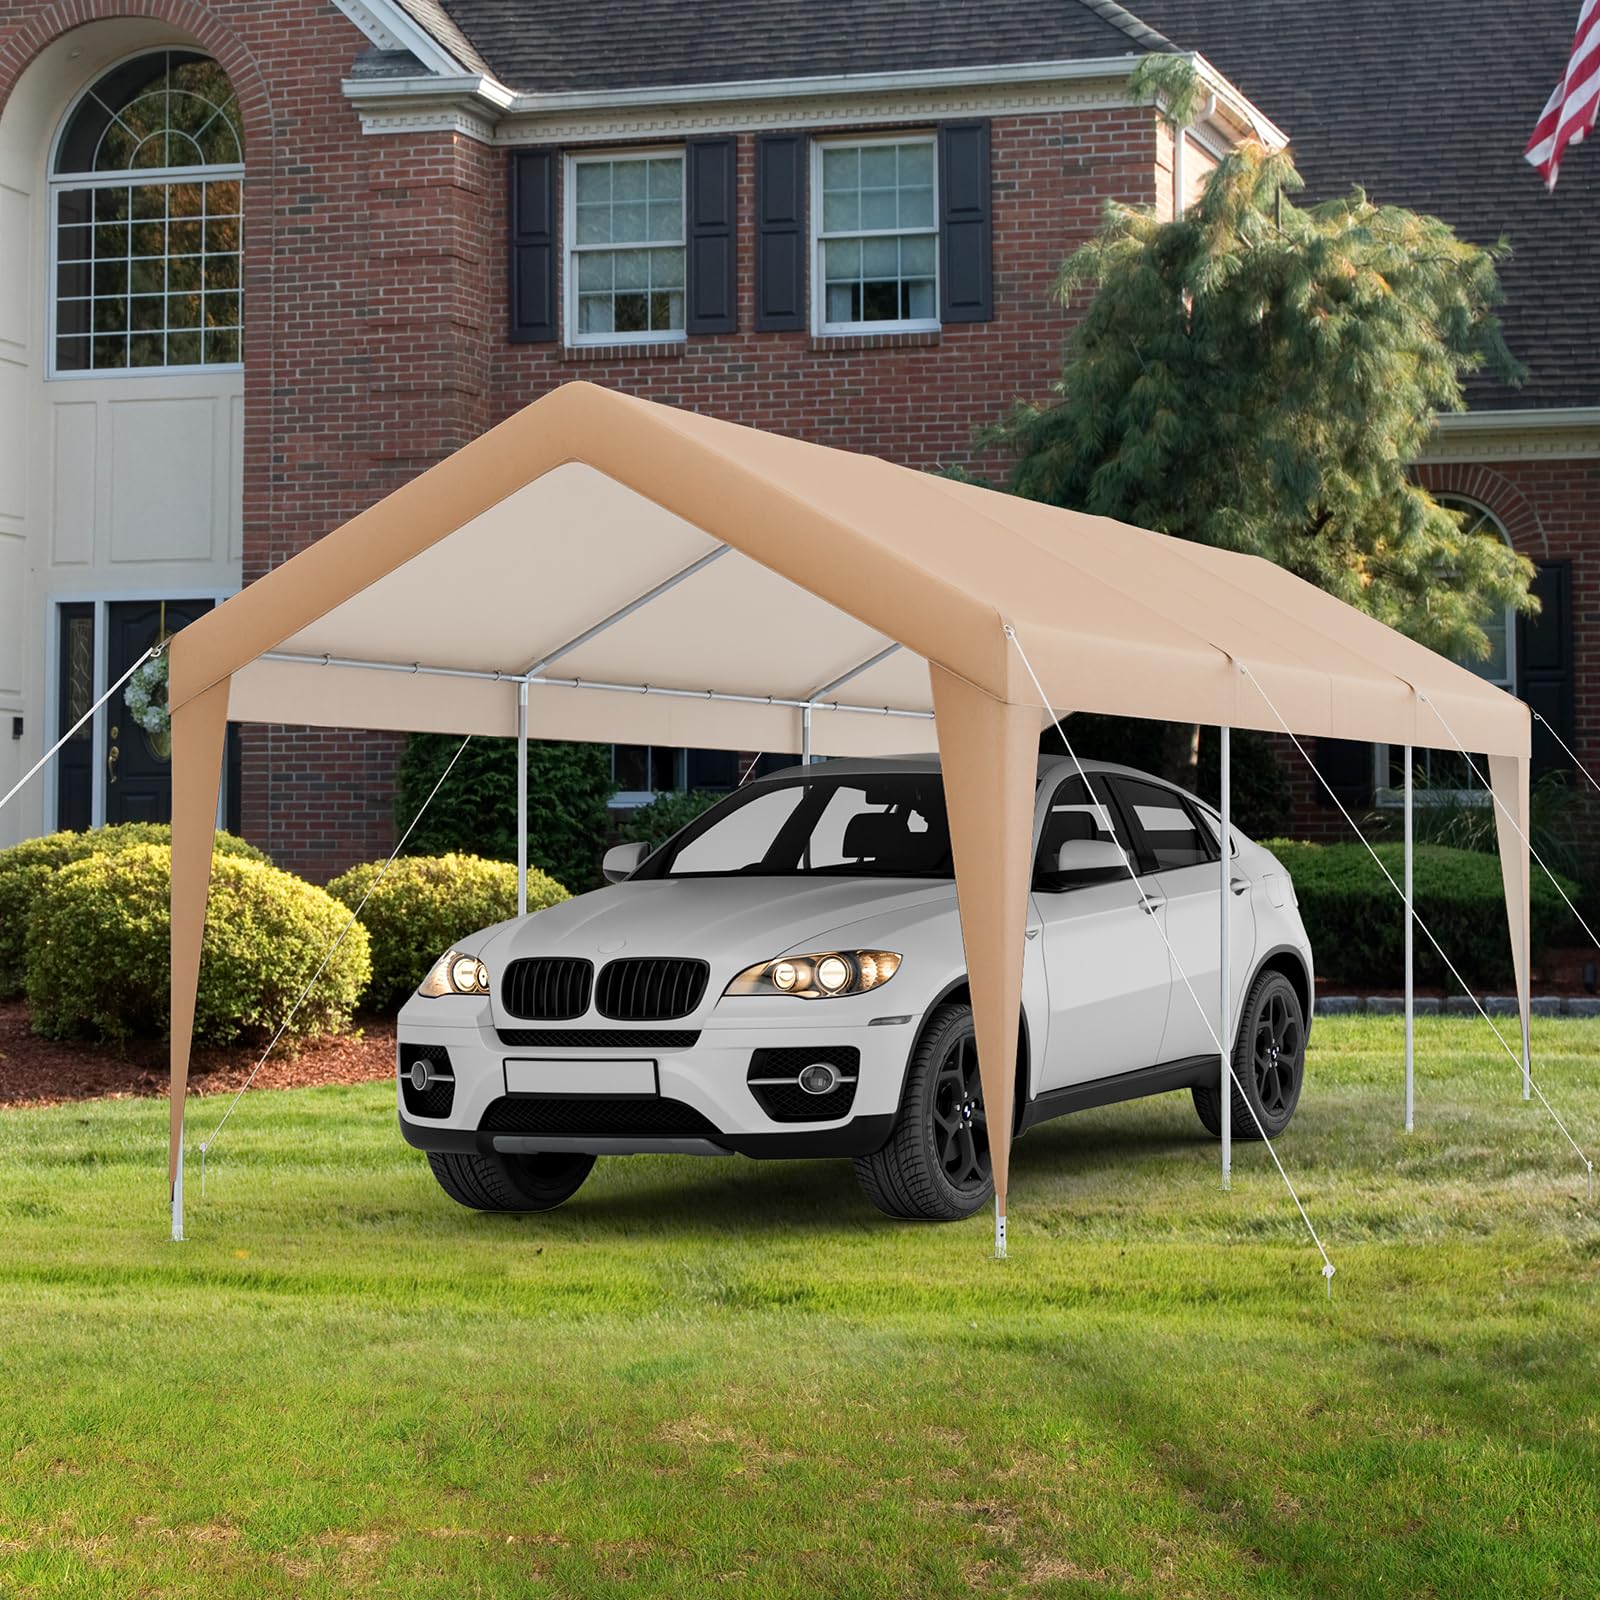 10 x 20 FT Heavy-Duty Steel Frame Carport Portable Garage Tent, All-Season Outdoor SUV Truck Car Canopy Boat Shelter Carports Ease2day